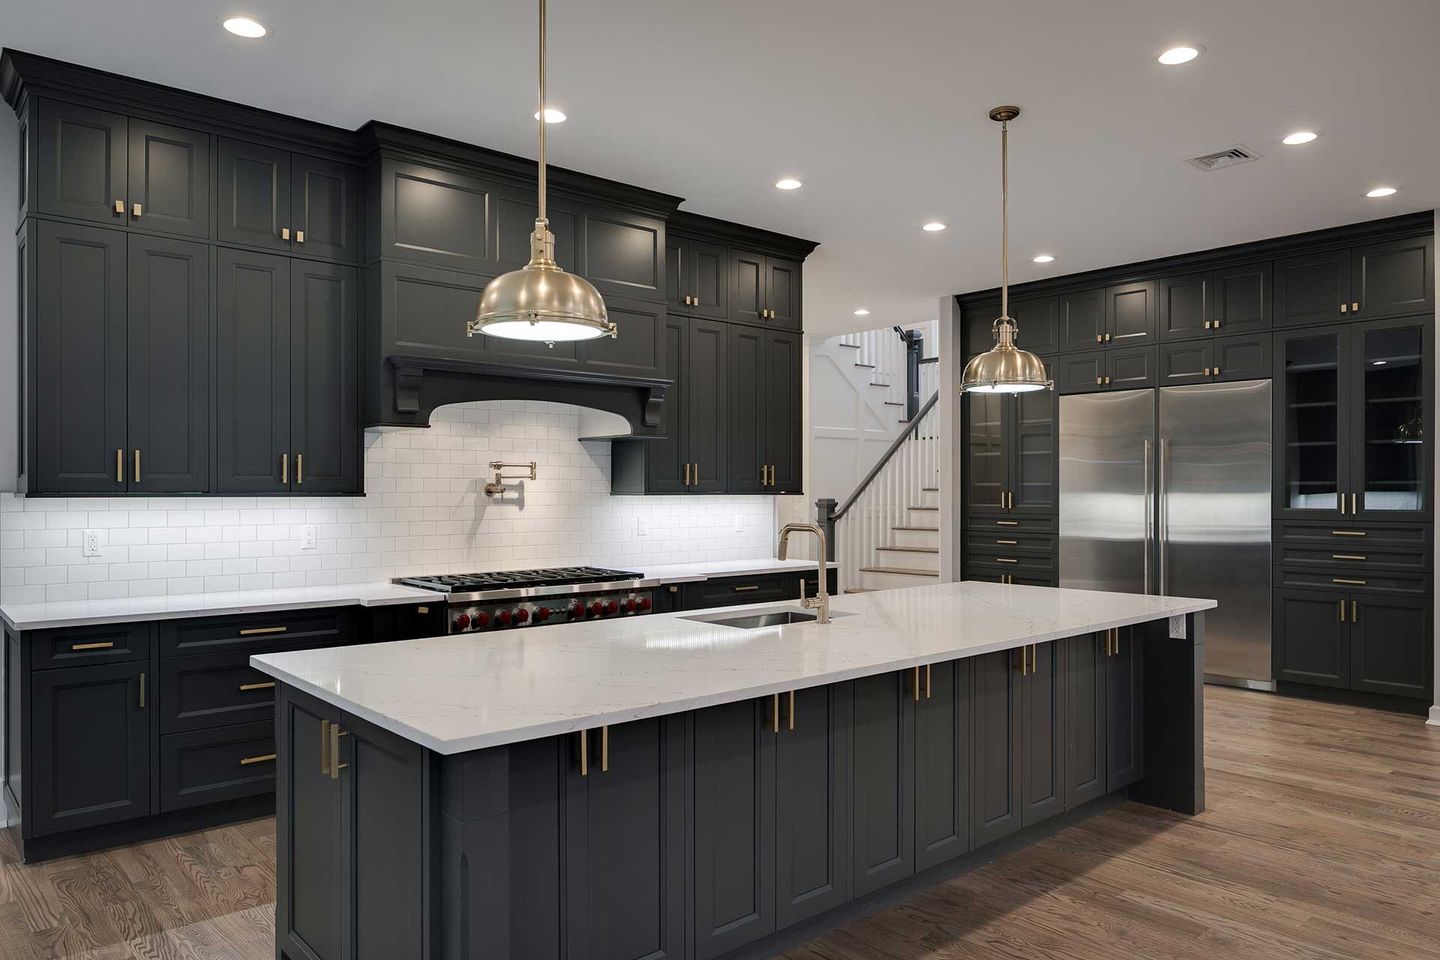 LPS Kitchen Cabinets - Farmingdale, NY - Personalize Your Space